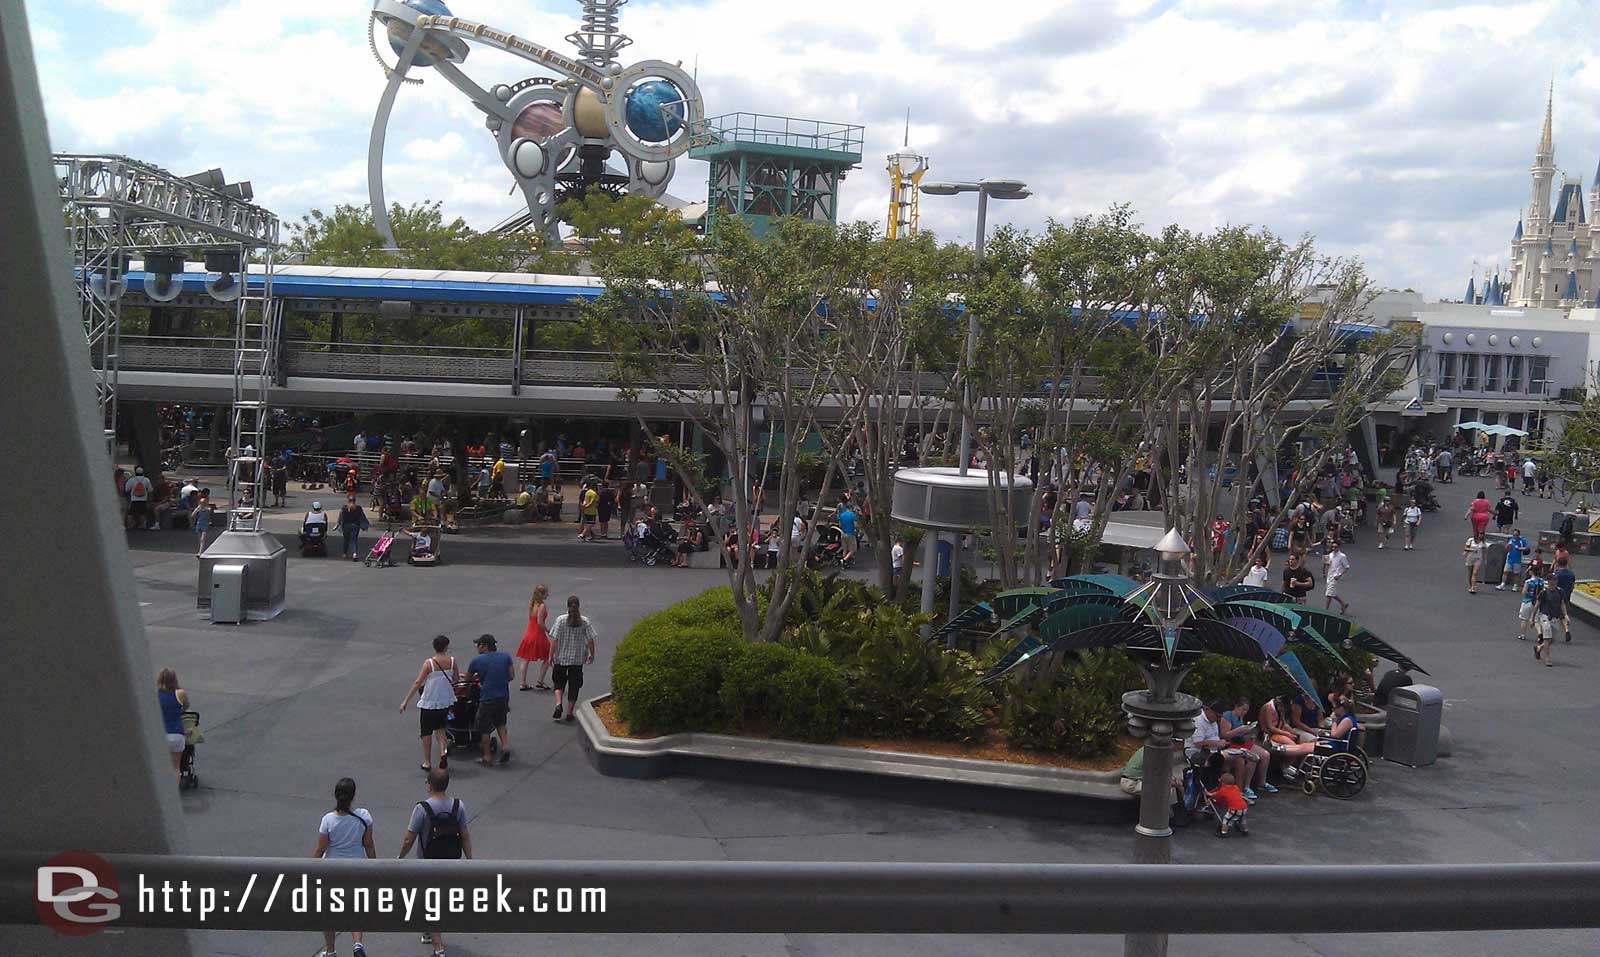 Tomorrowland from the Peoplemover